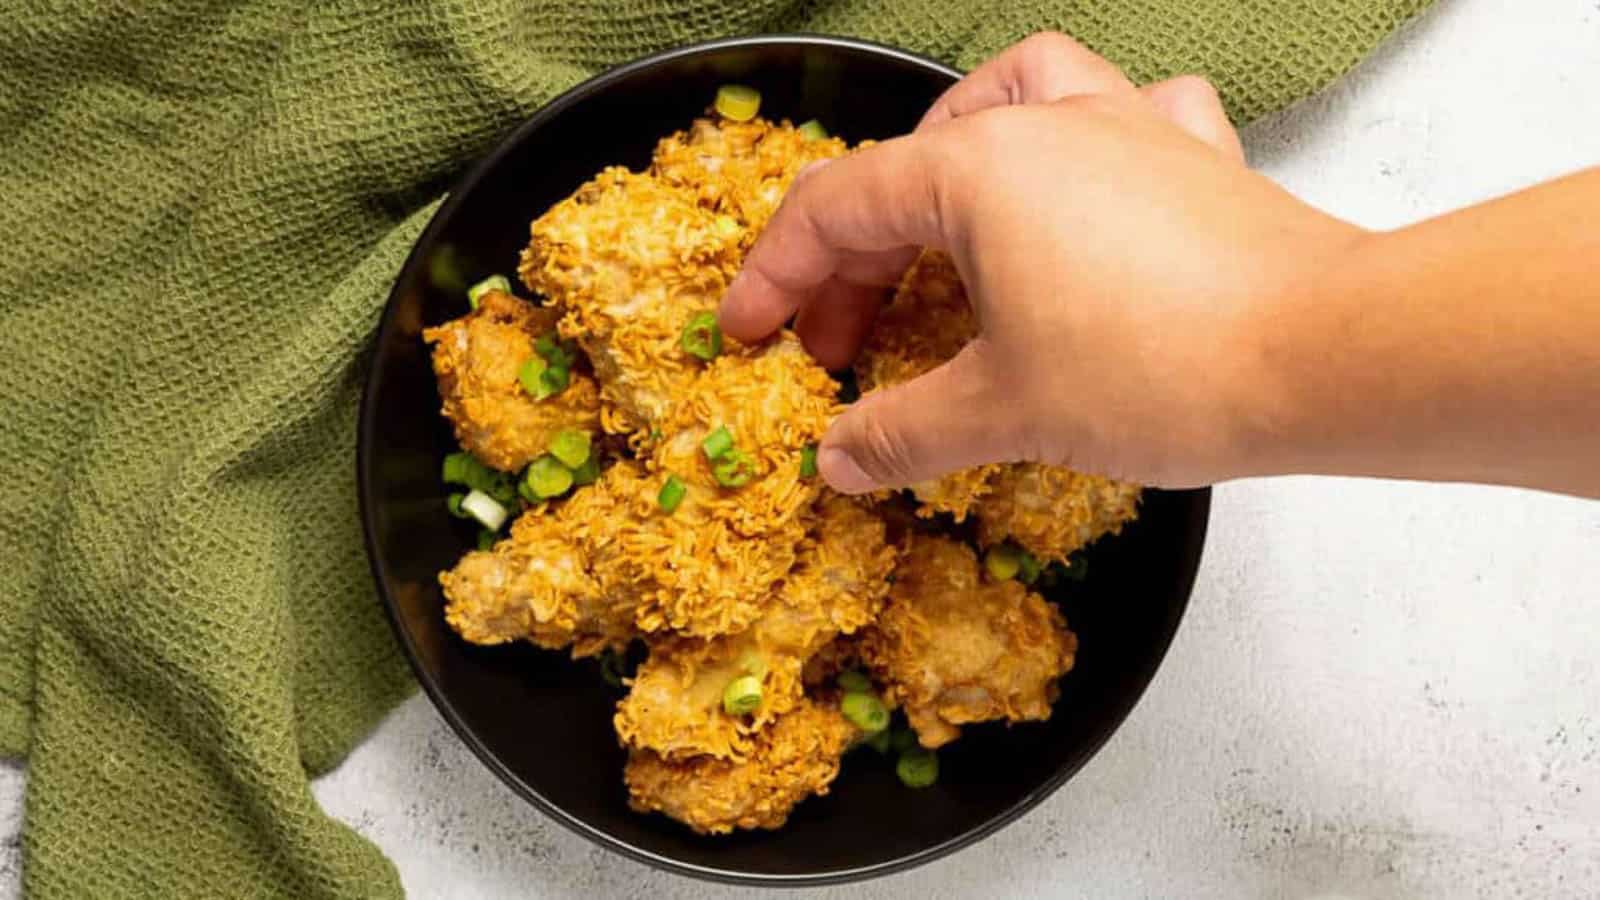 Hand reaching into a bowl of ramen fried chicken pieces.